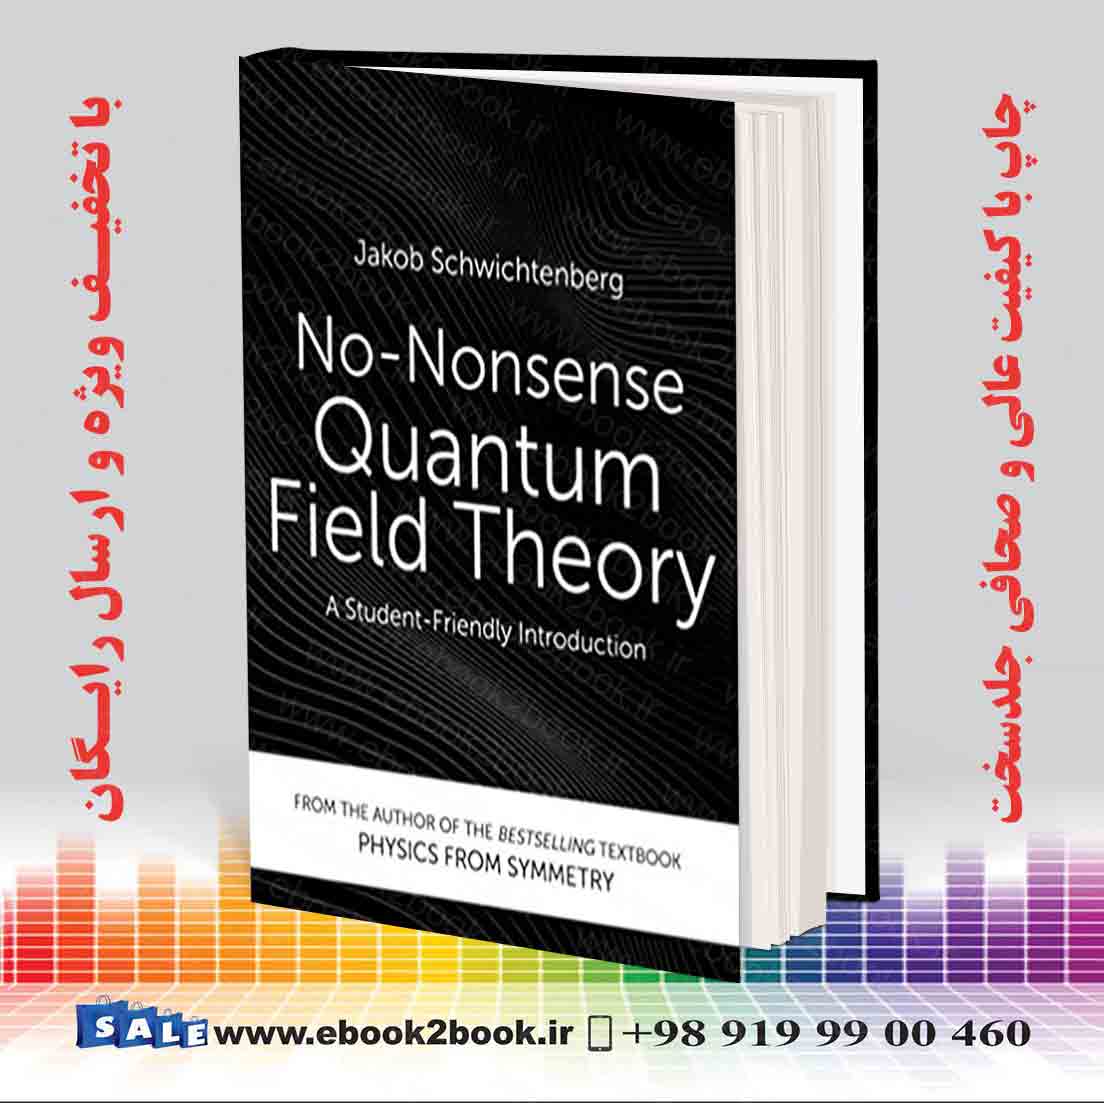 No-Nonsense Quantum Field Theory: A Student-Friendly Introduction Paperback  by Jakob Schwichtenberg